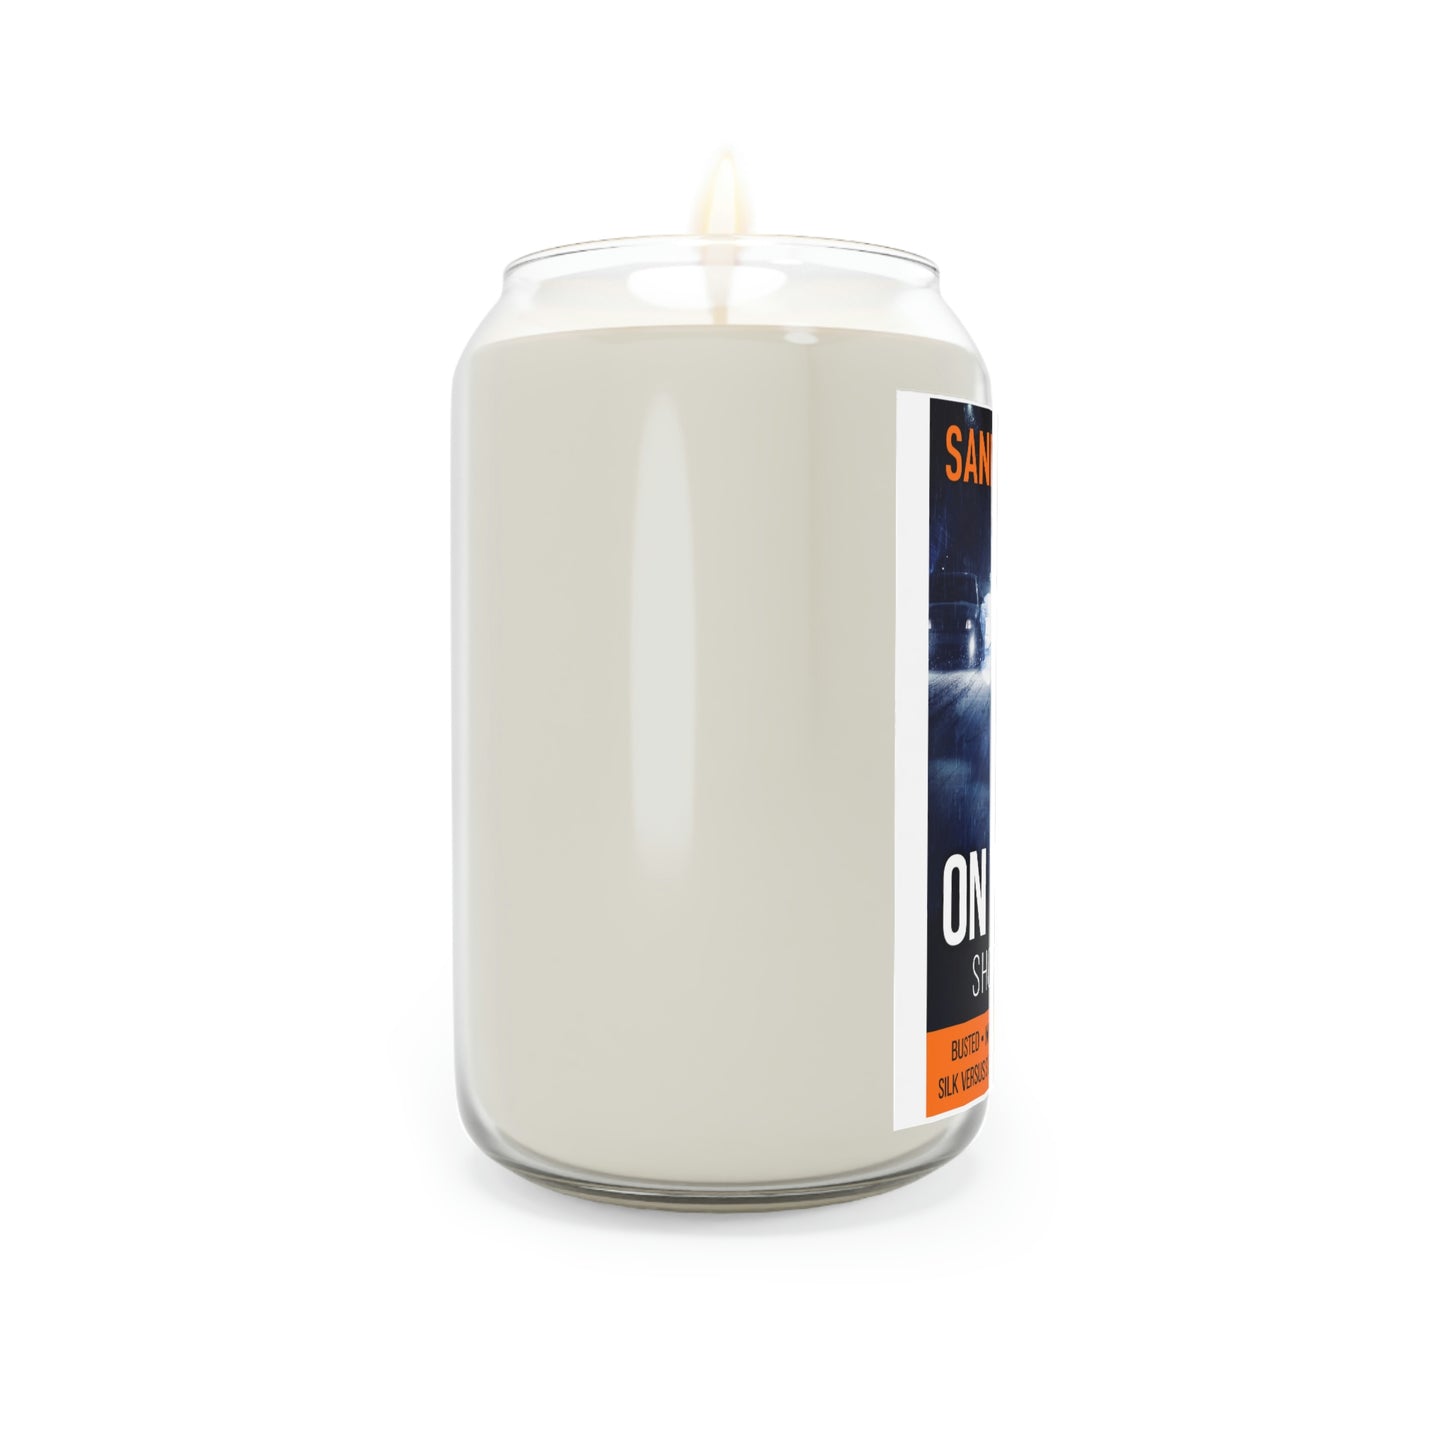 On The Job - Scented Candle